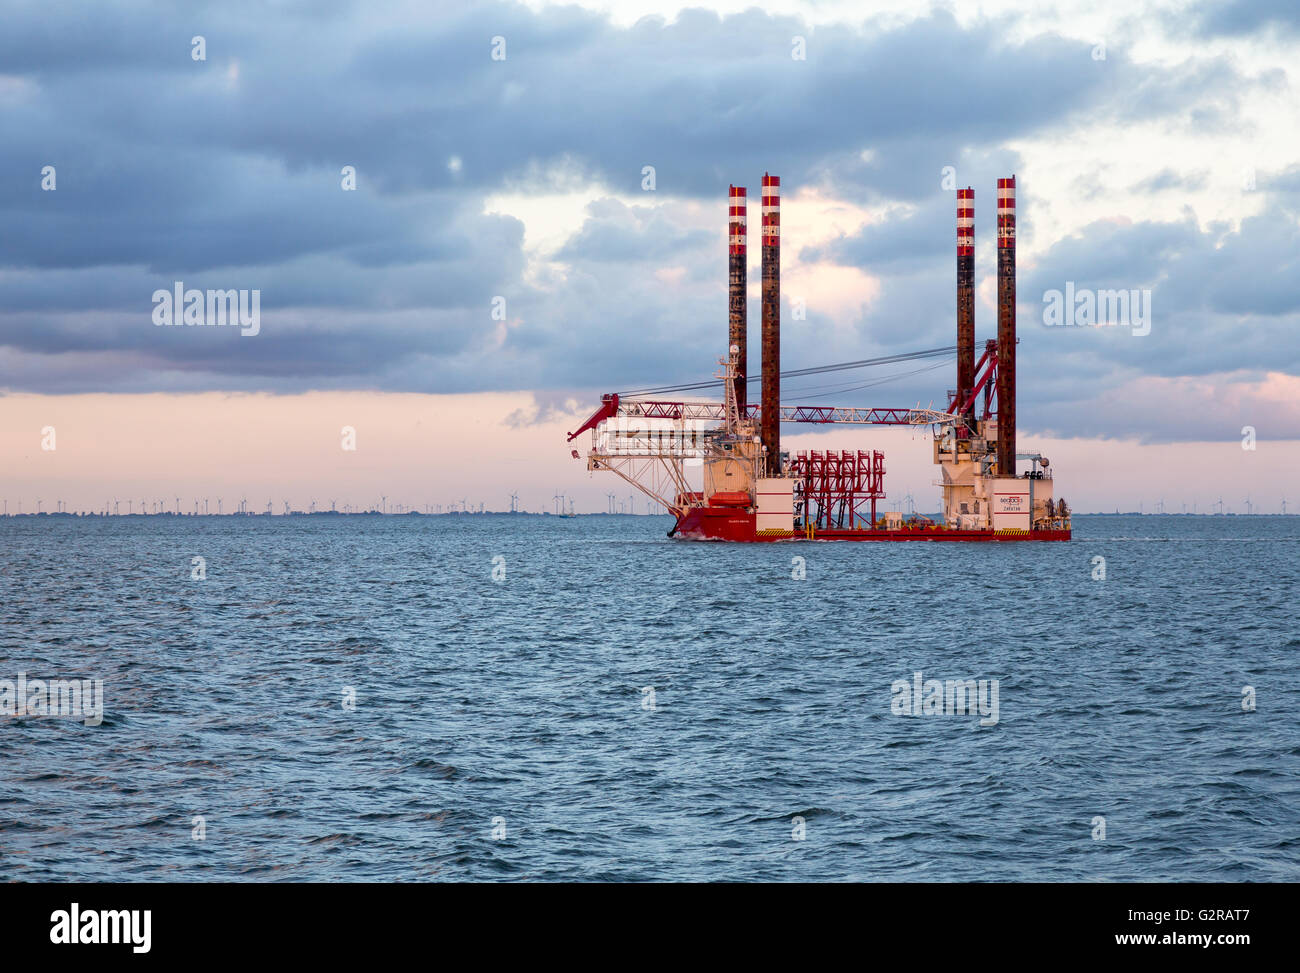 20.09.2015, Cuxhaven, Lower Saxony, Germany - Construction vessel for offshore wind turbines in niedersaechsisch Wadden Sea. / Special ship for setting up offshore wind turbines. 00A150920D337CAROEX.JPG - NOT for SALE in G E R M A N Y, A U S T R I A, S W I T Z E R L A N D [MODEL RELEASE: NOT APPLICABLE, PROPERTY RELEASE: NO, (c) caro photo agency / Bastian, http://www.caro-images.com, info@carofoto.pl - Any use of this picture is subject to royalty!] Stock Photo